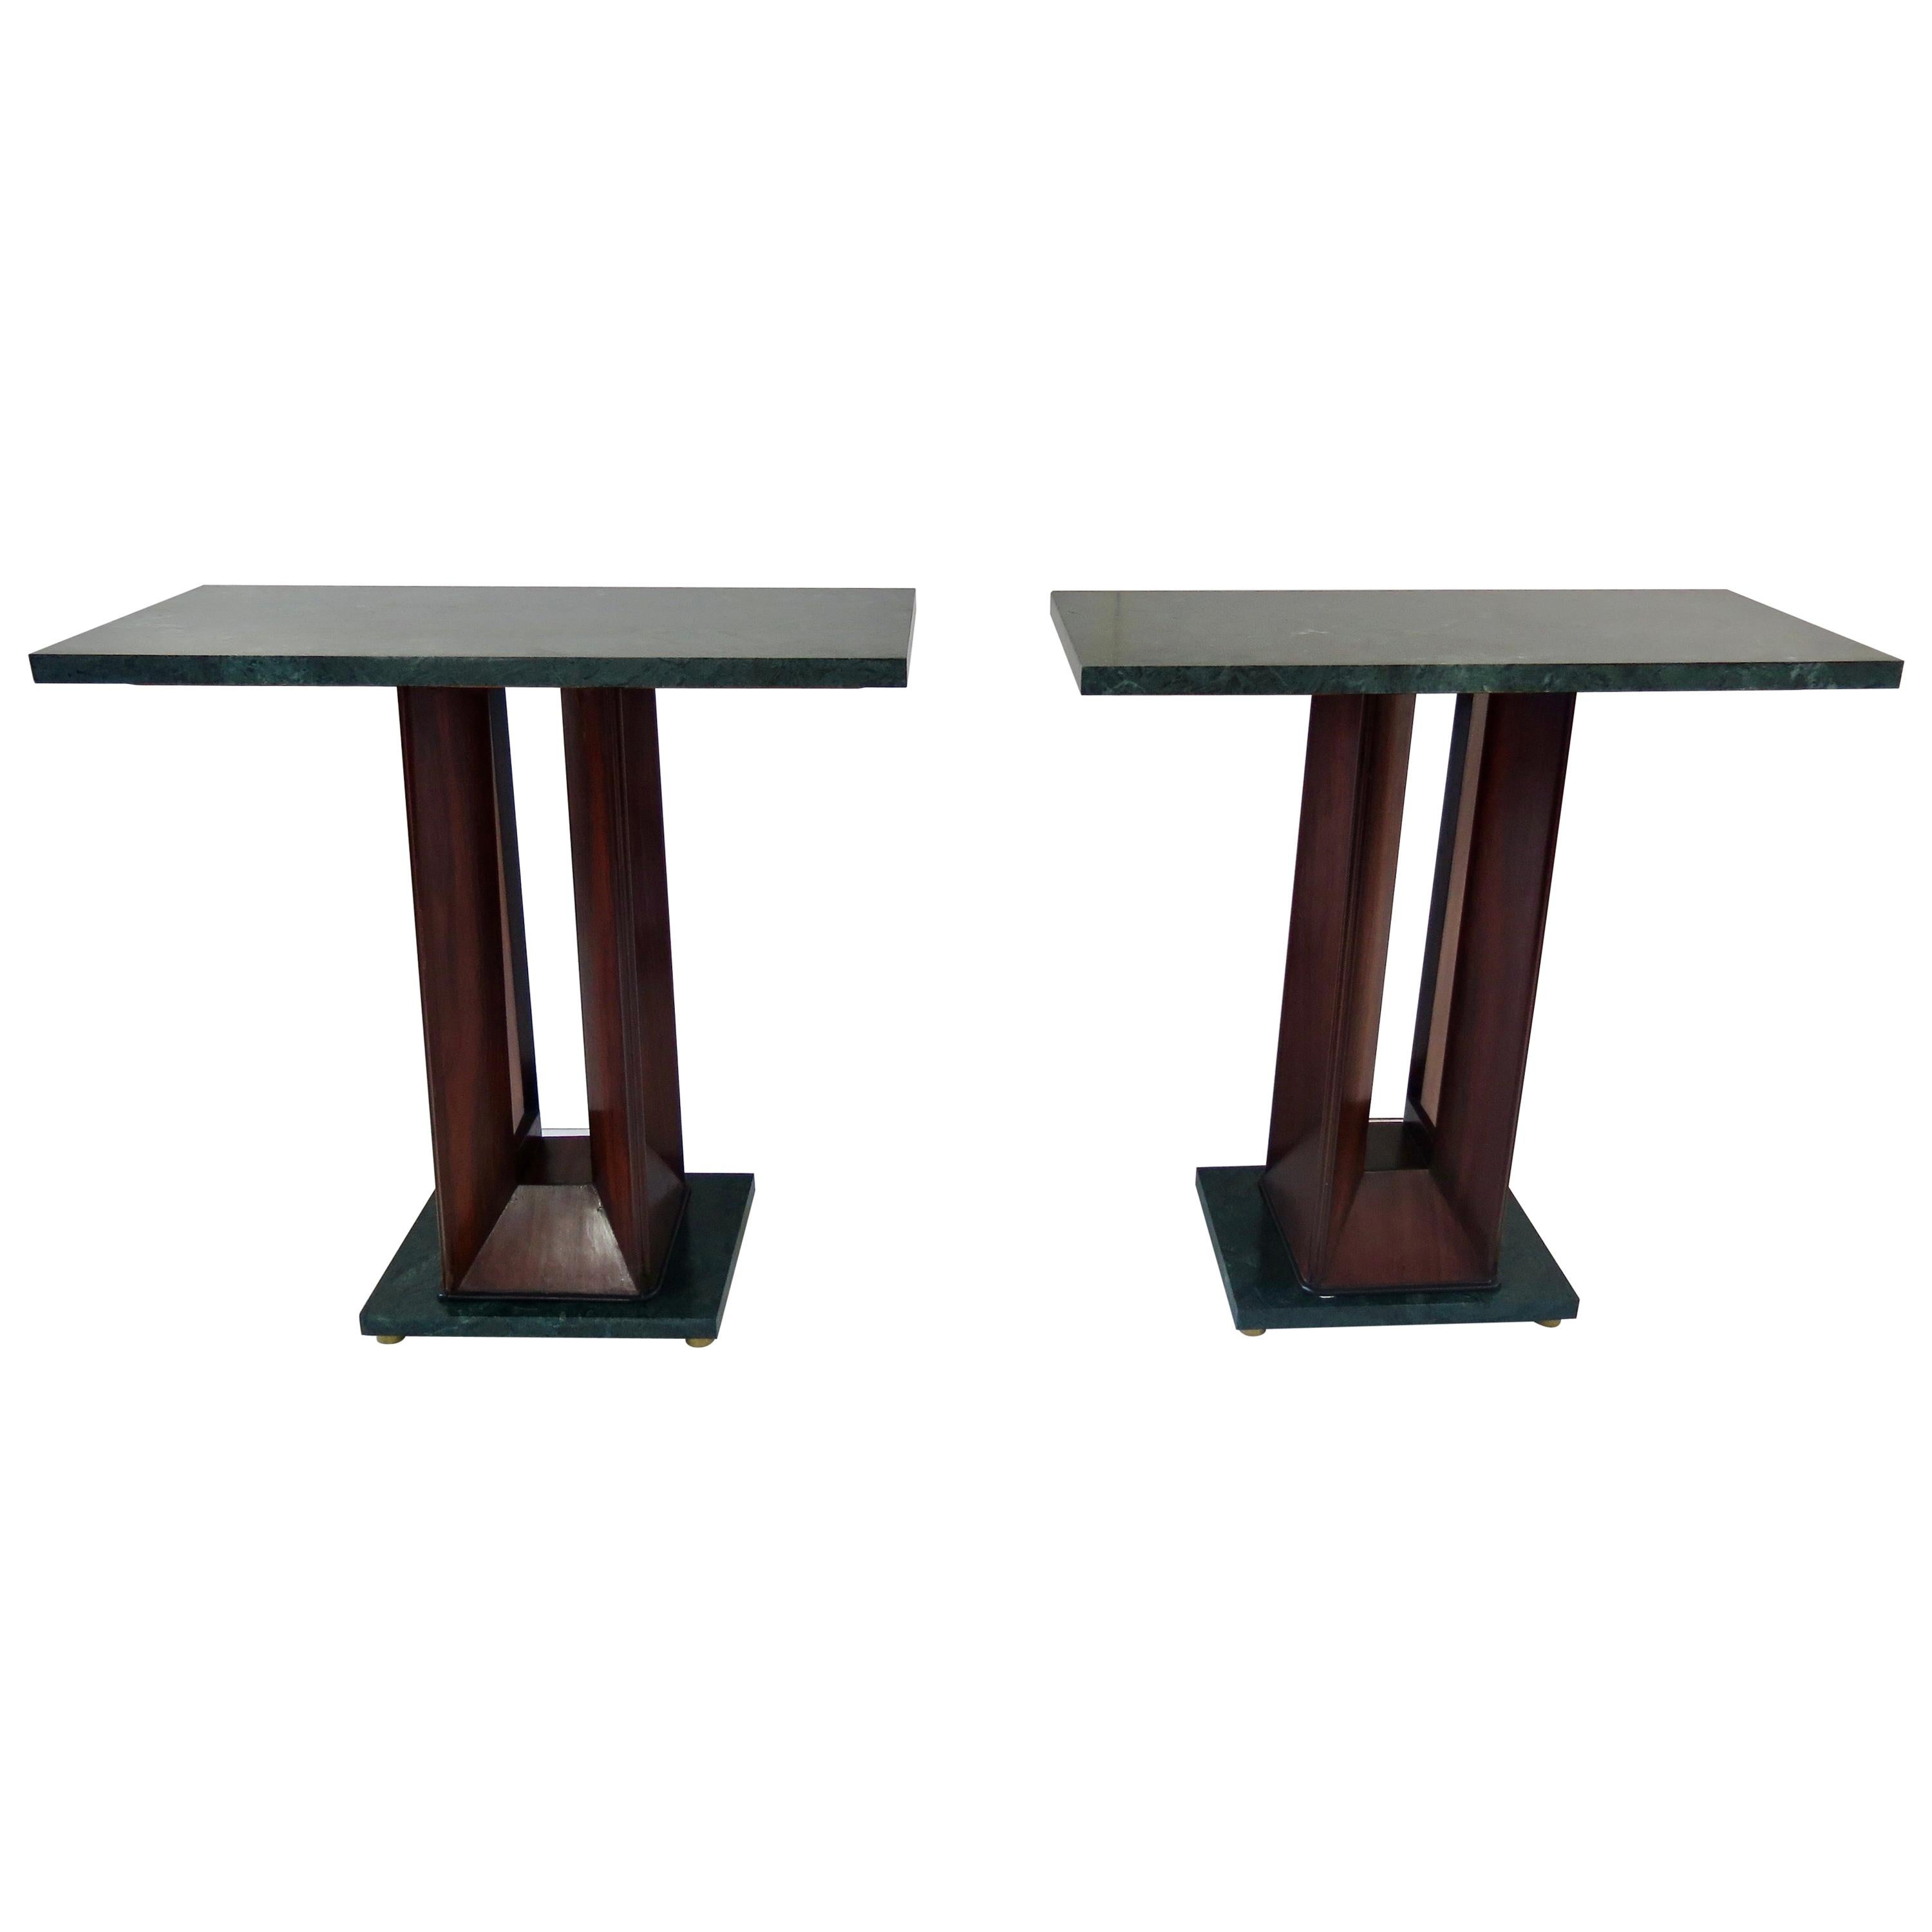 Pair of Dassi "verde alpi" Marble and Rosewood Console Tables, 1940 For Sale